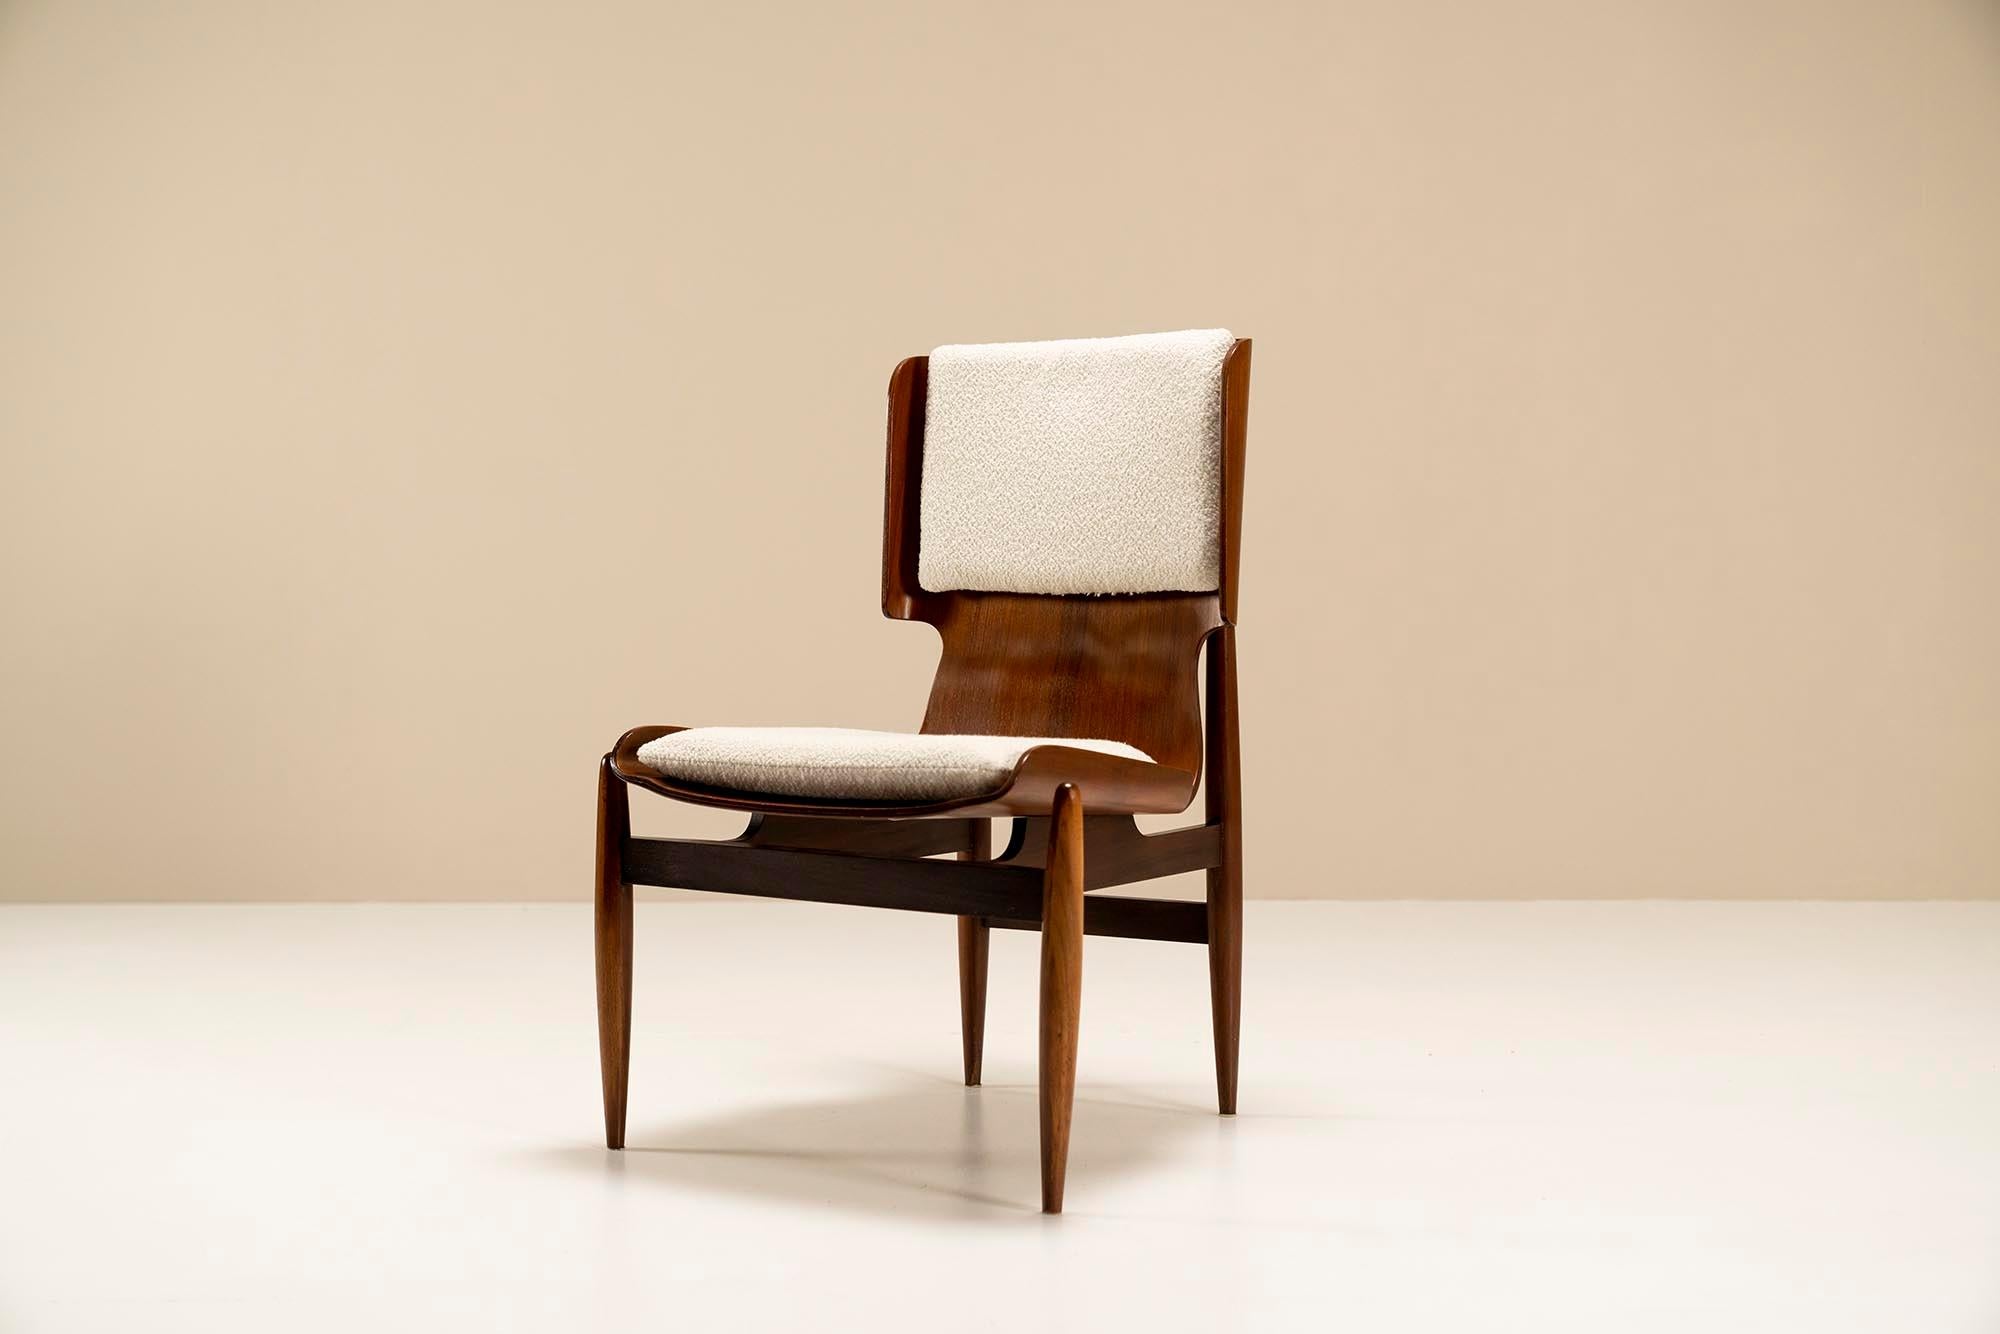 Italian Side Chair in Bentwood with Rosewood Veneer by Barovero Turin, Italy, 1960s